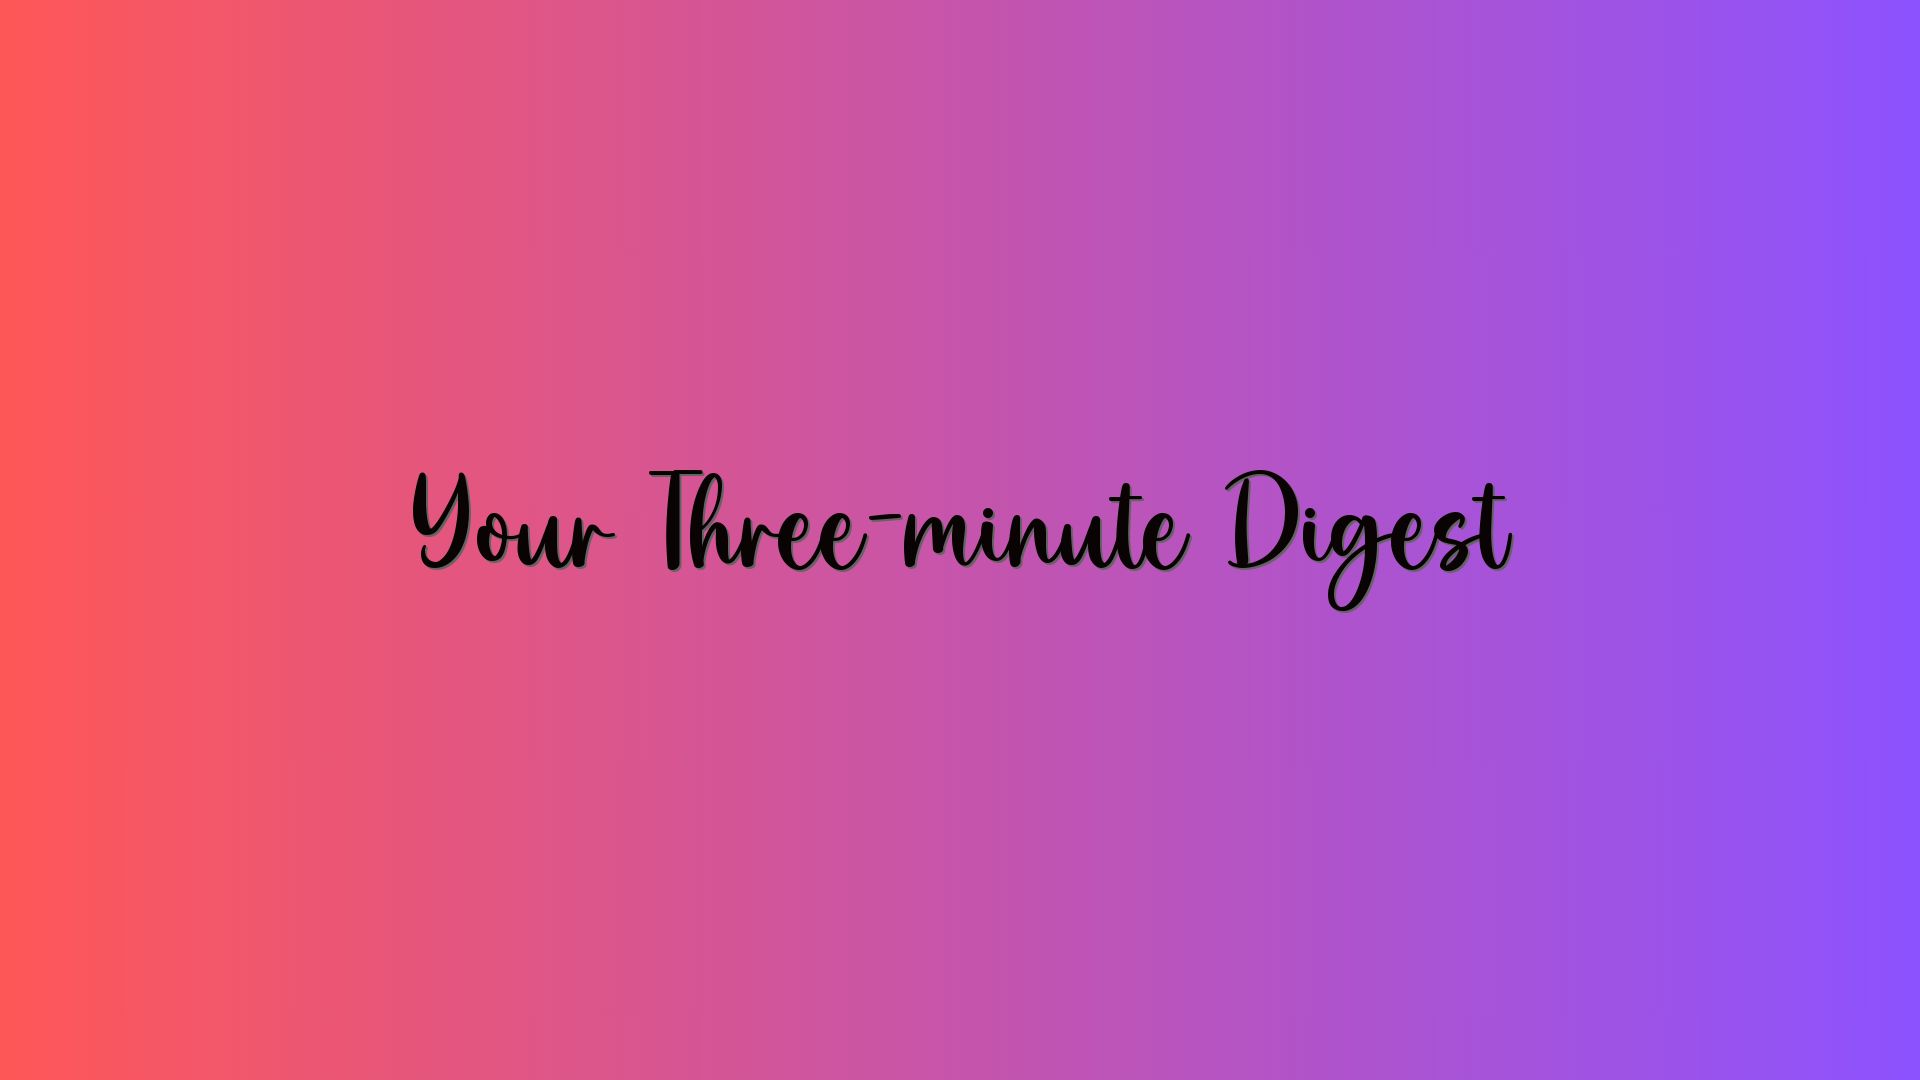 Your Three-minute Digest